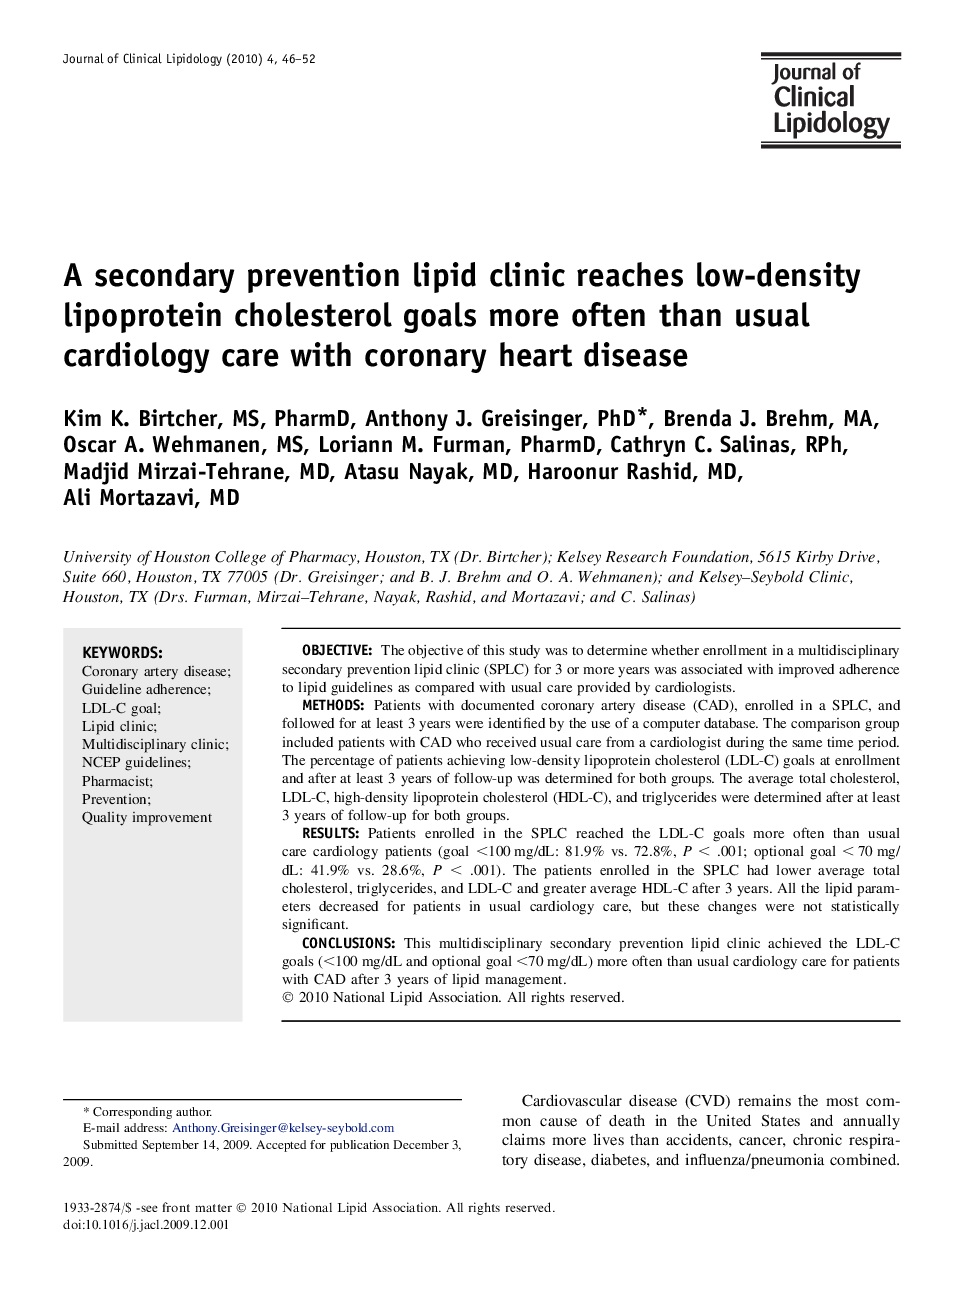 A secondary prevention lipid clinic reaches low-density lipoprotein cholesterol goals more often than usual cardiology care with coronary heart disease